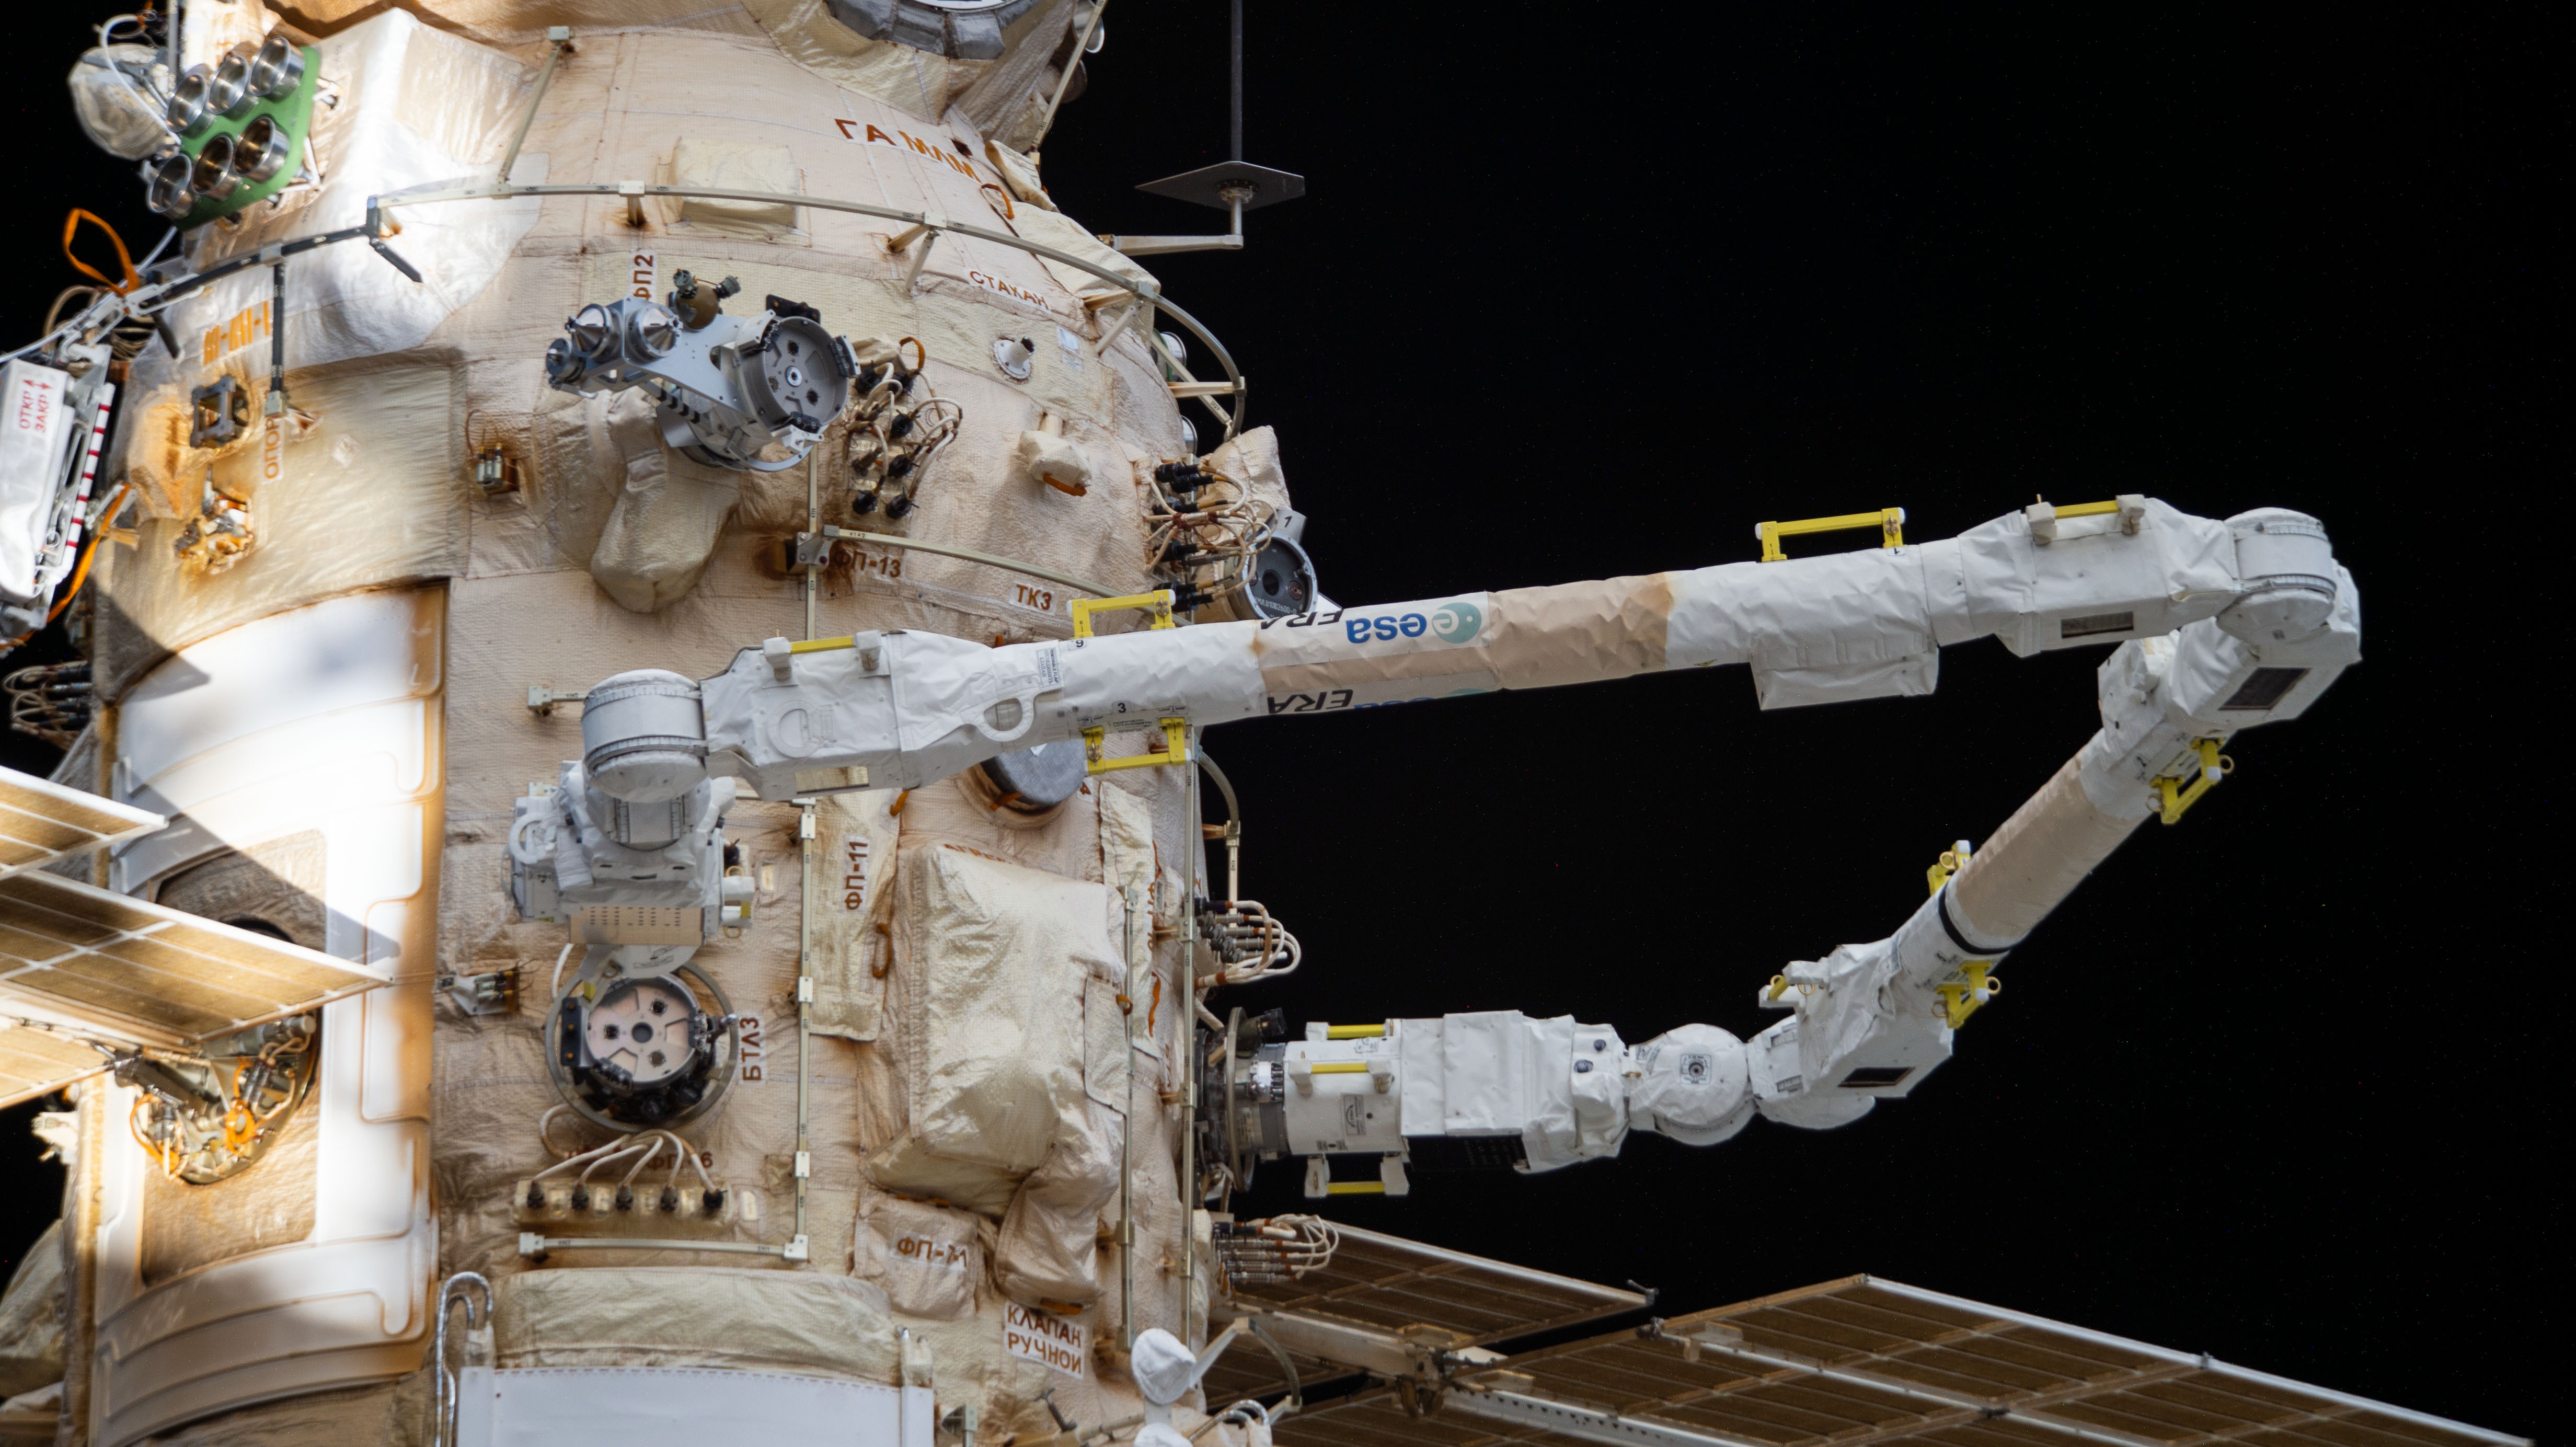 The European robotic arm extends out from the Nauka module